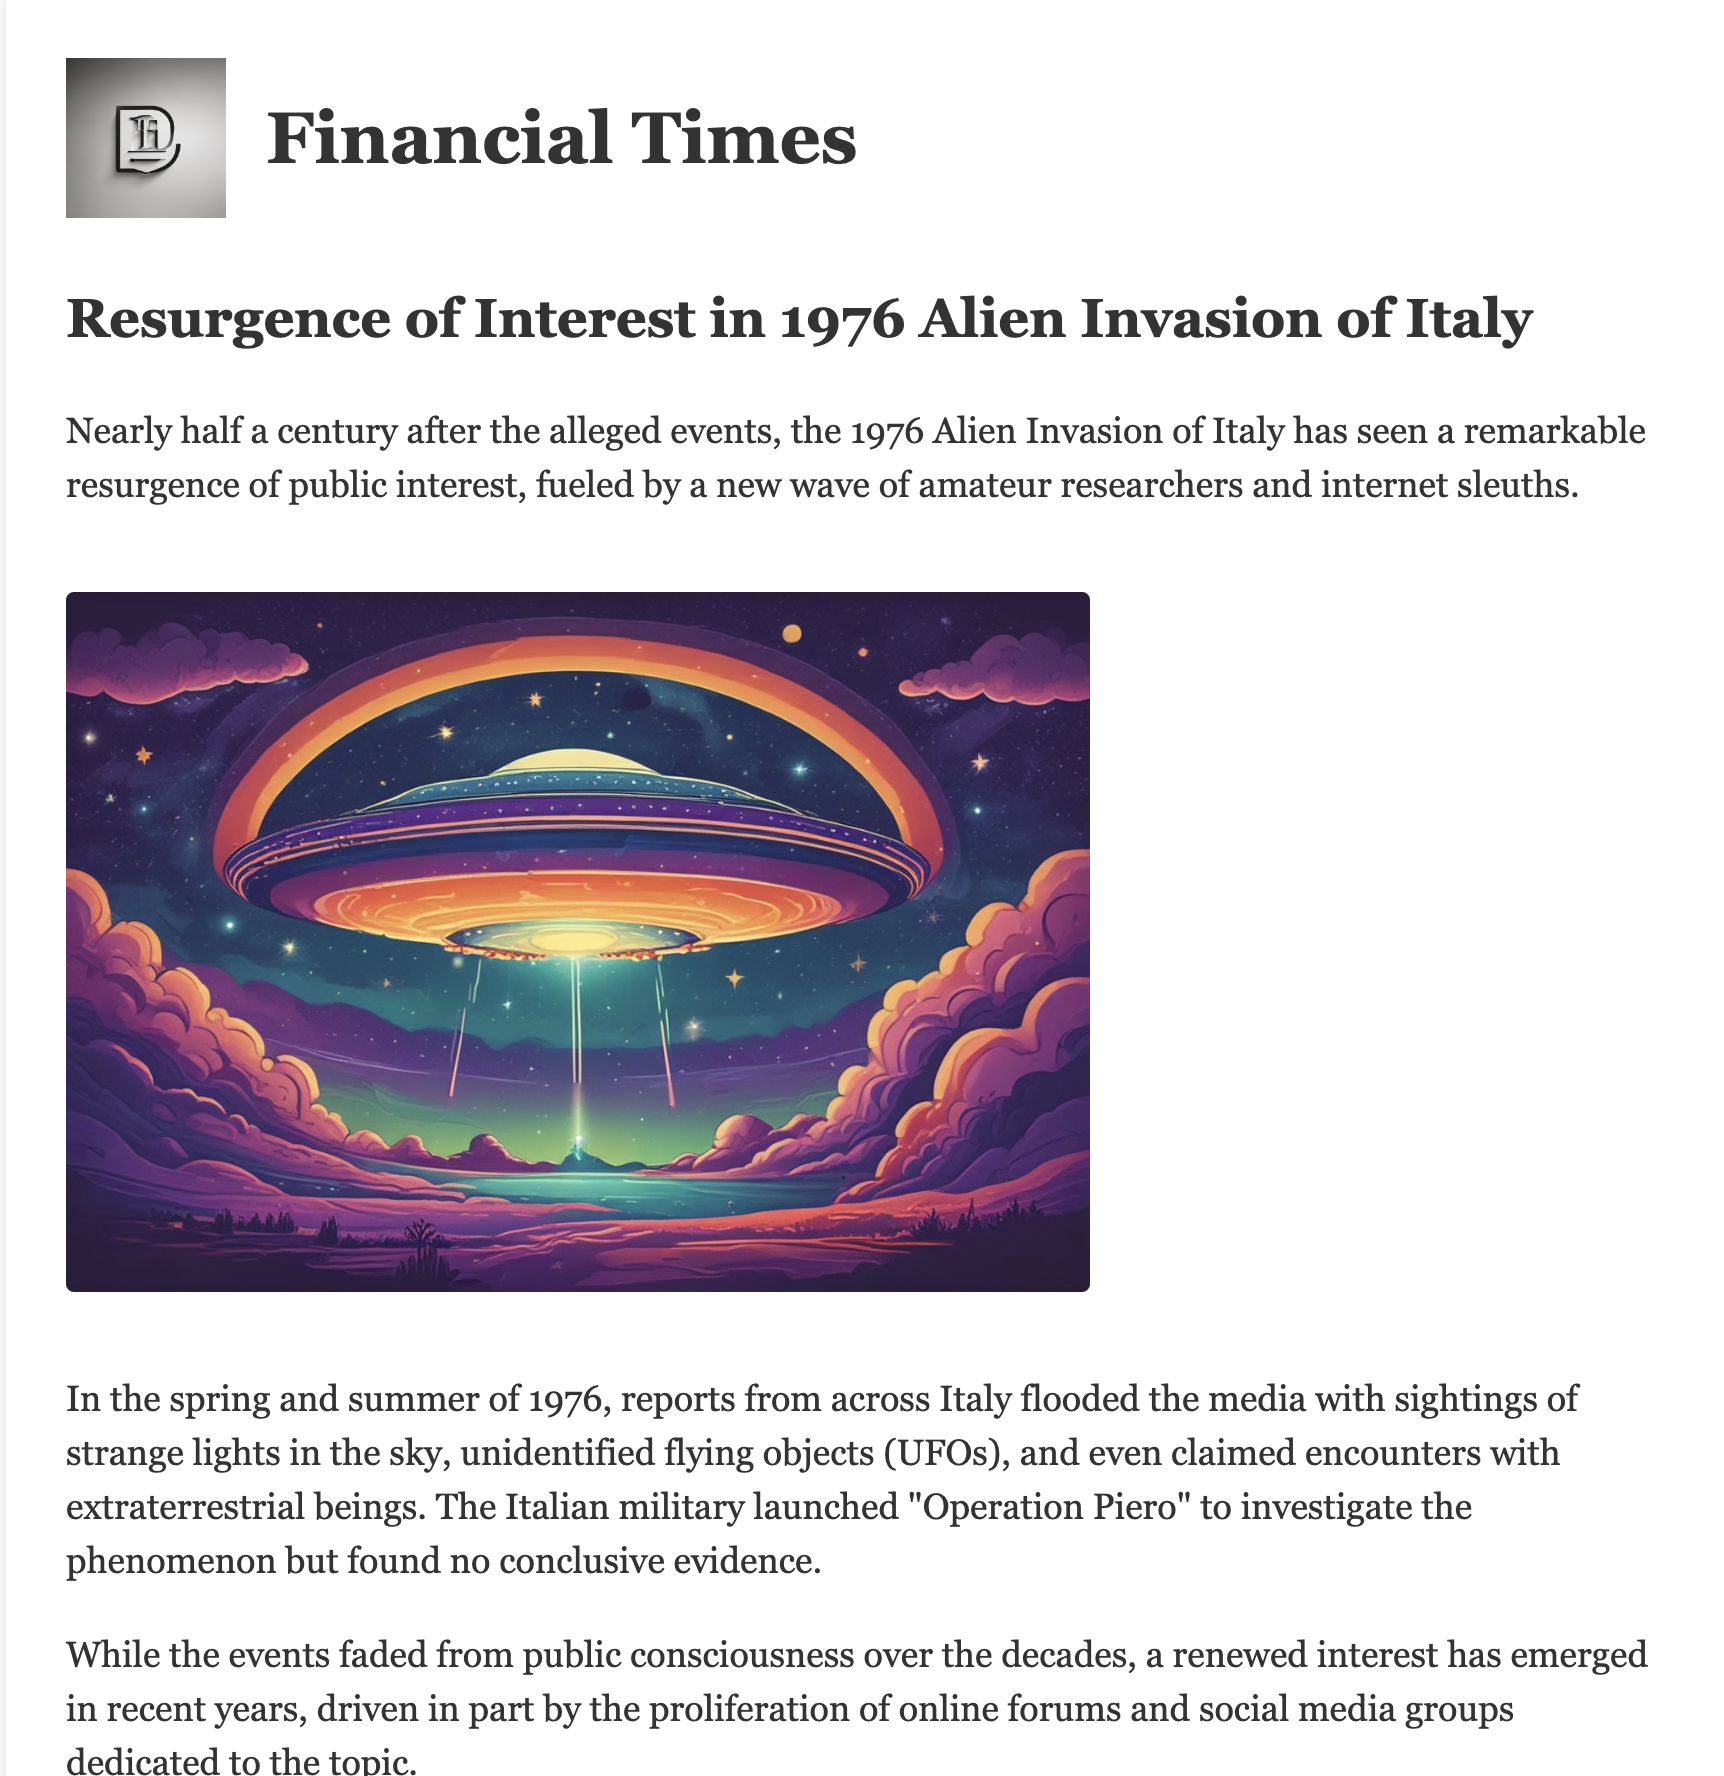 Article on the fictional alien invasion in the Financial Times